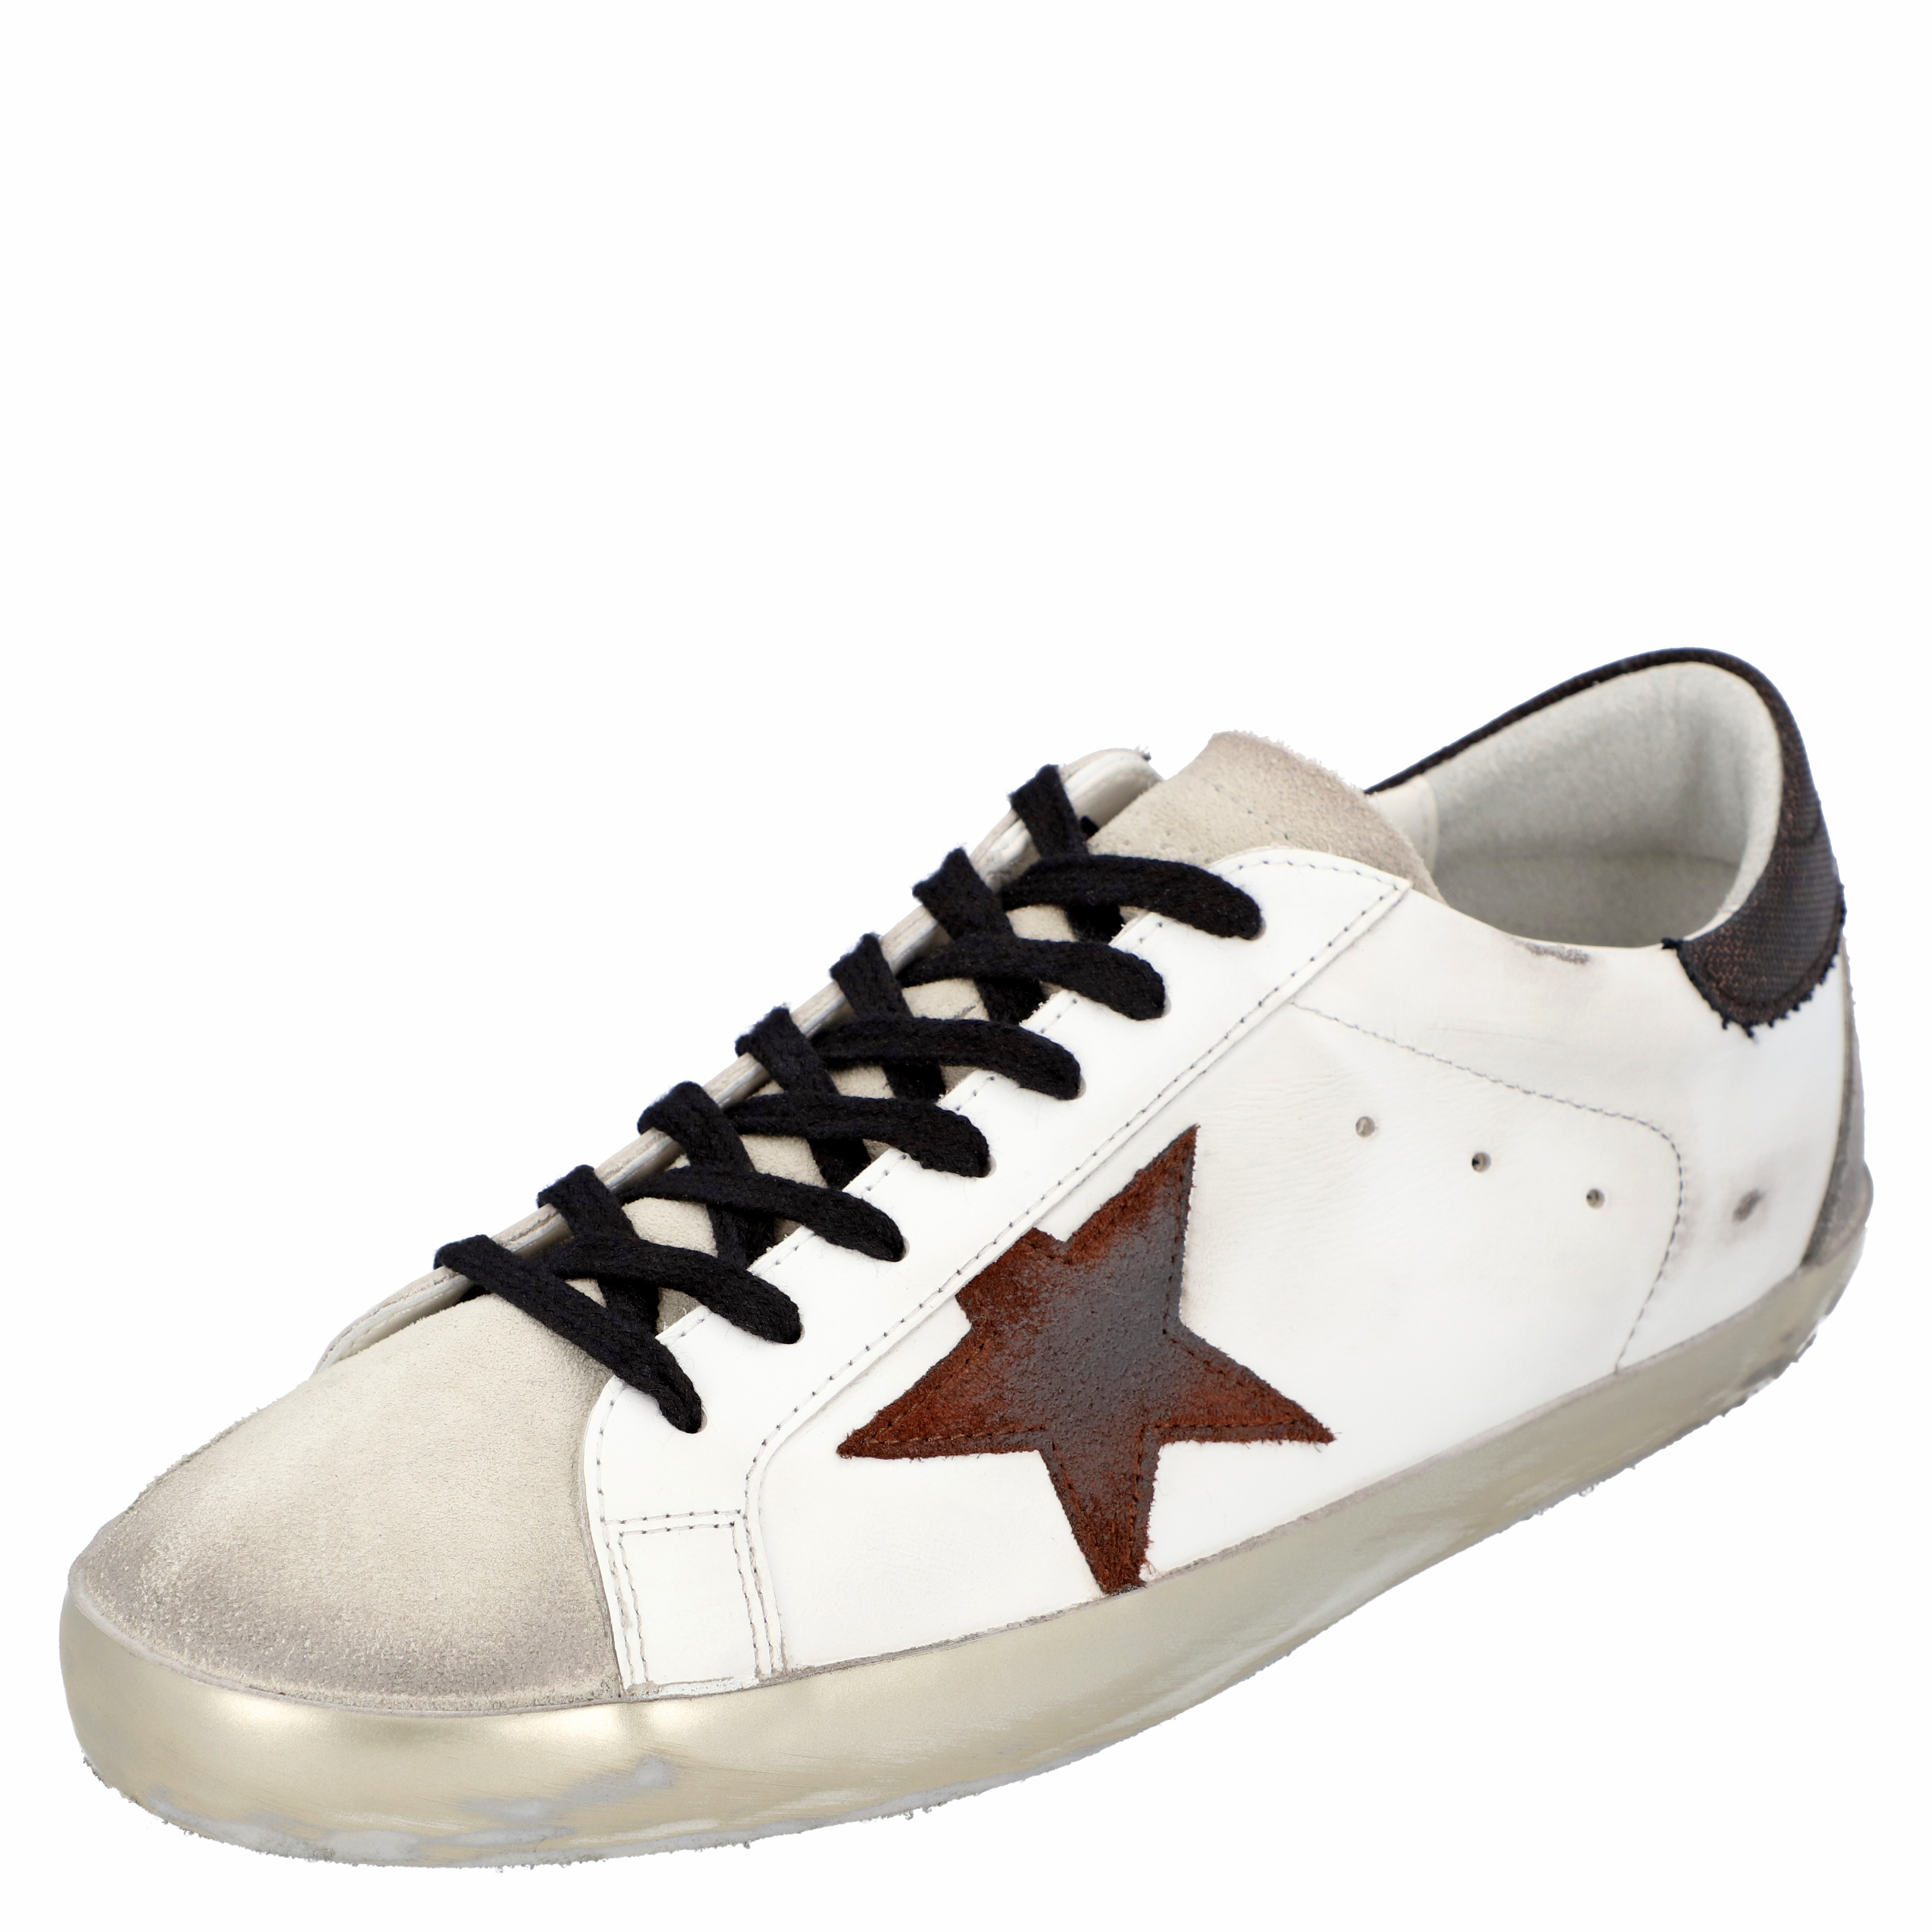 Golden Goose White/Black/Red Leather Superstar Sneakers Size EU 44